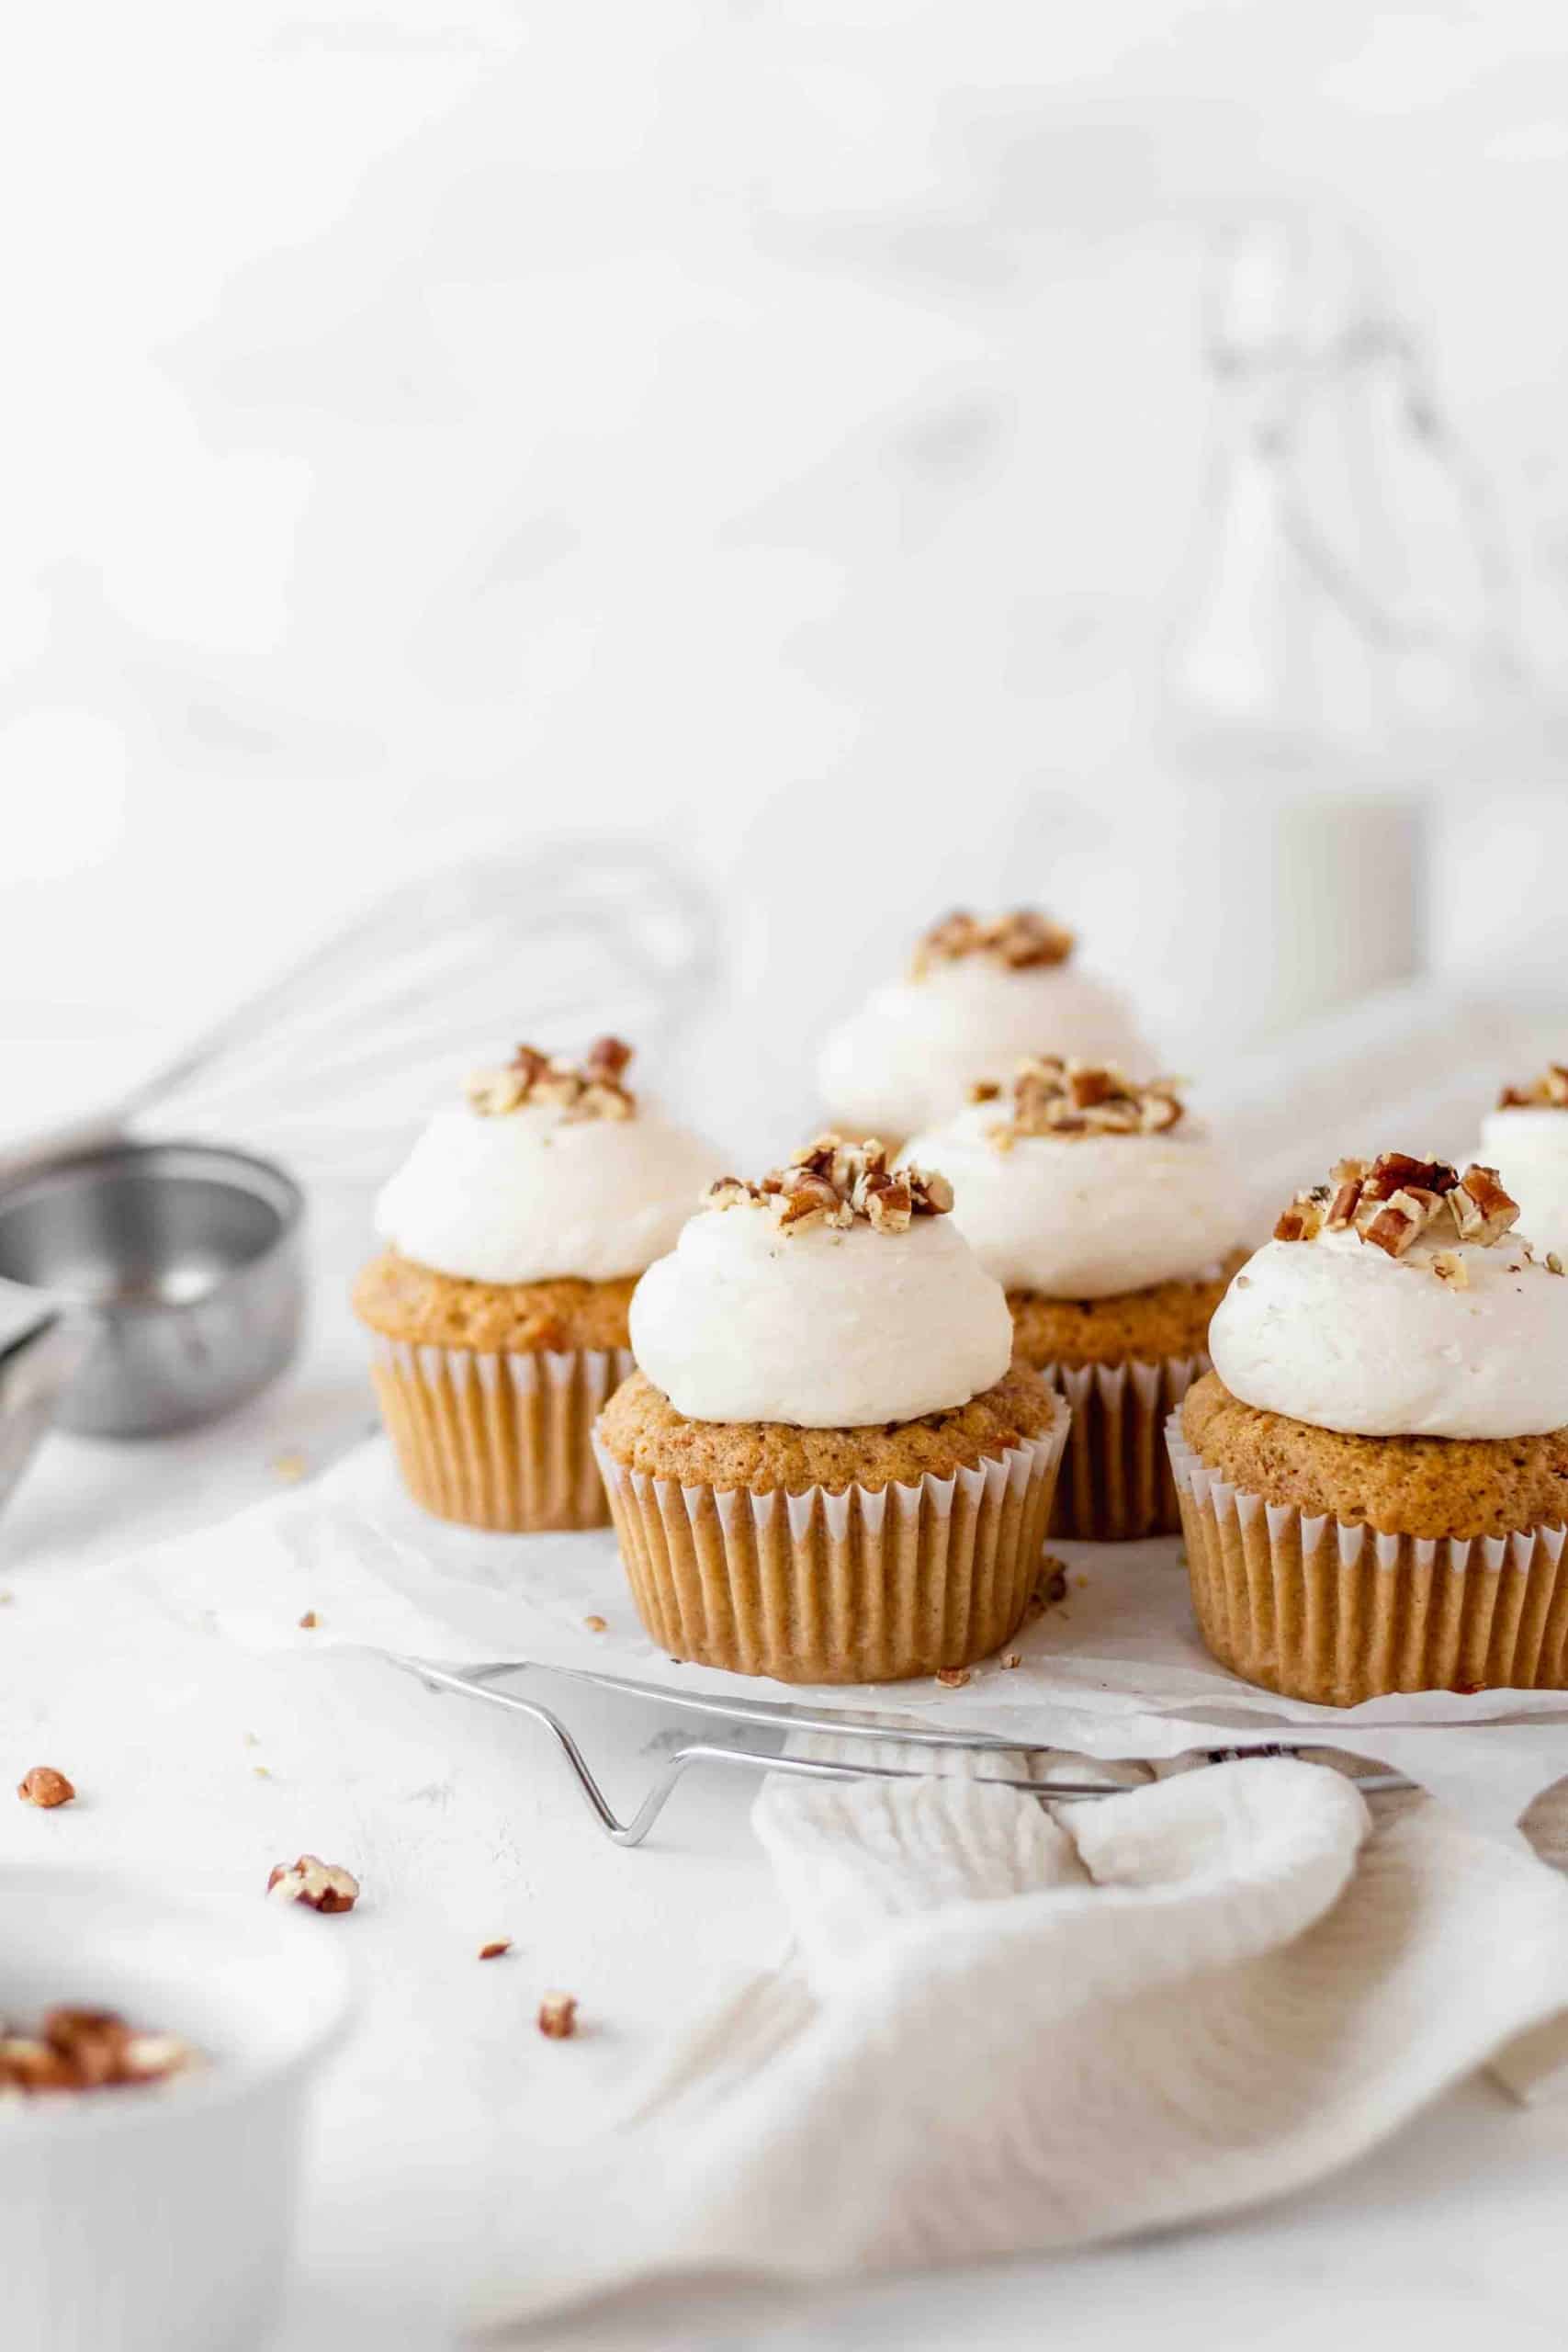 Carrot cake cupcakes with lemon cream cheese frosting